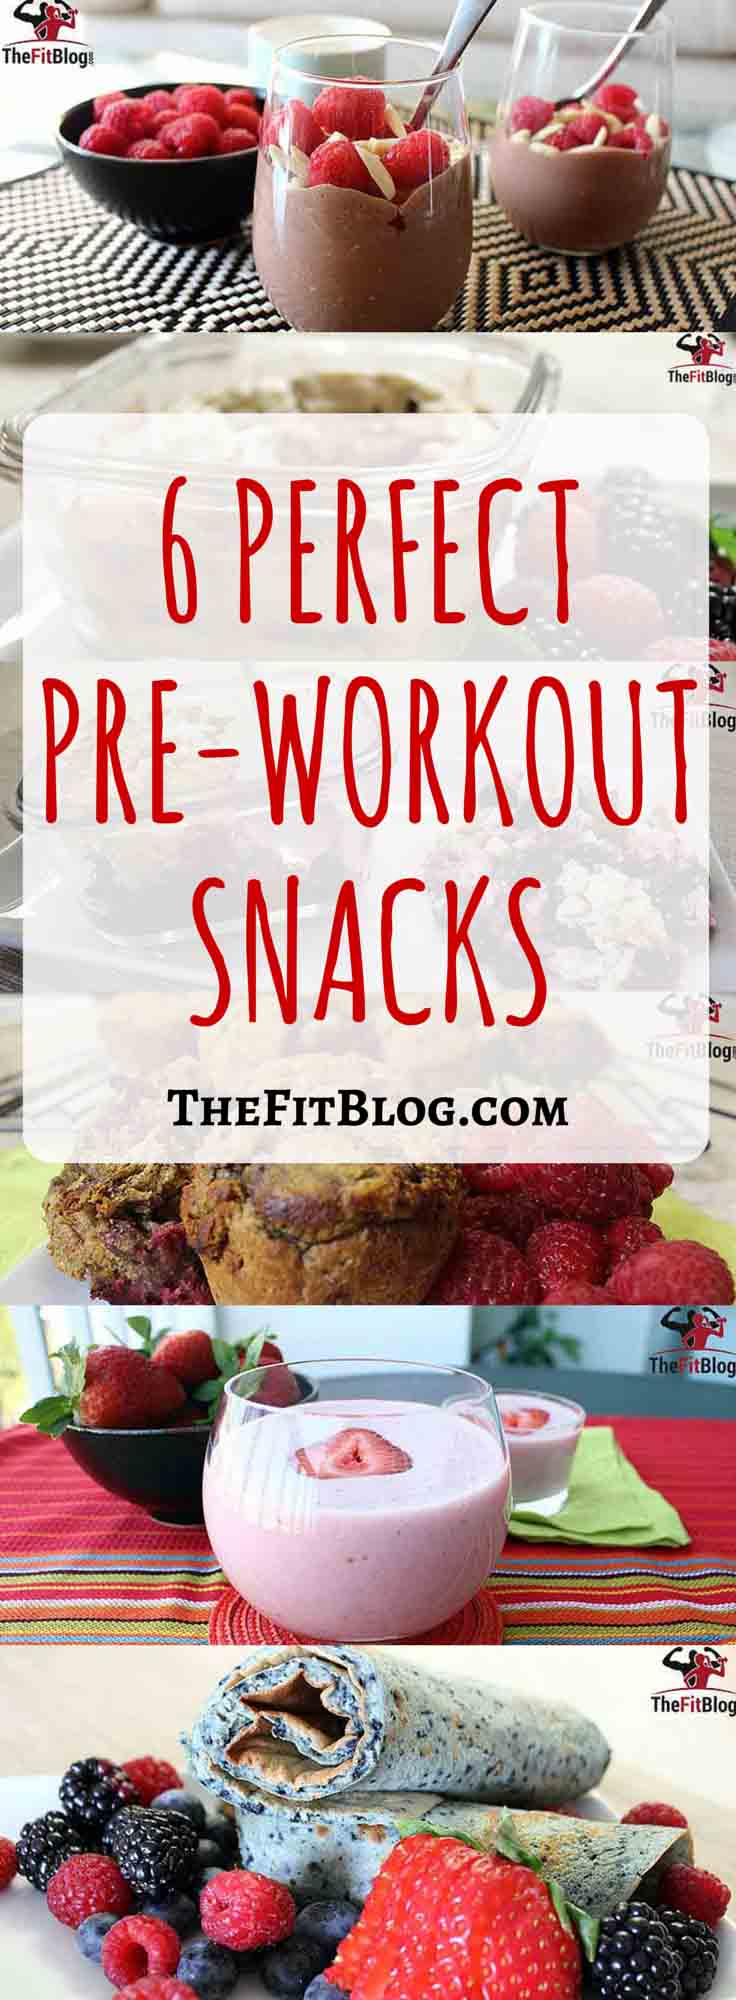 Learn what you should eat before your workouts and get six delicious recipes for the perfect pre-workout snacks and shakes. 